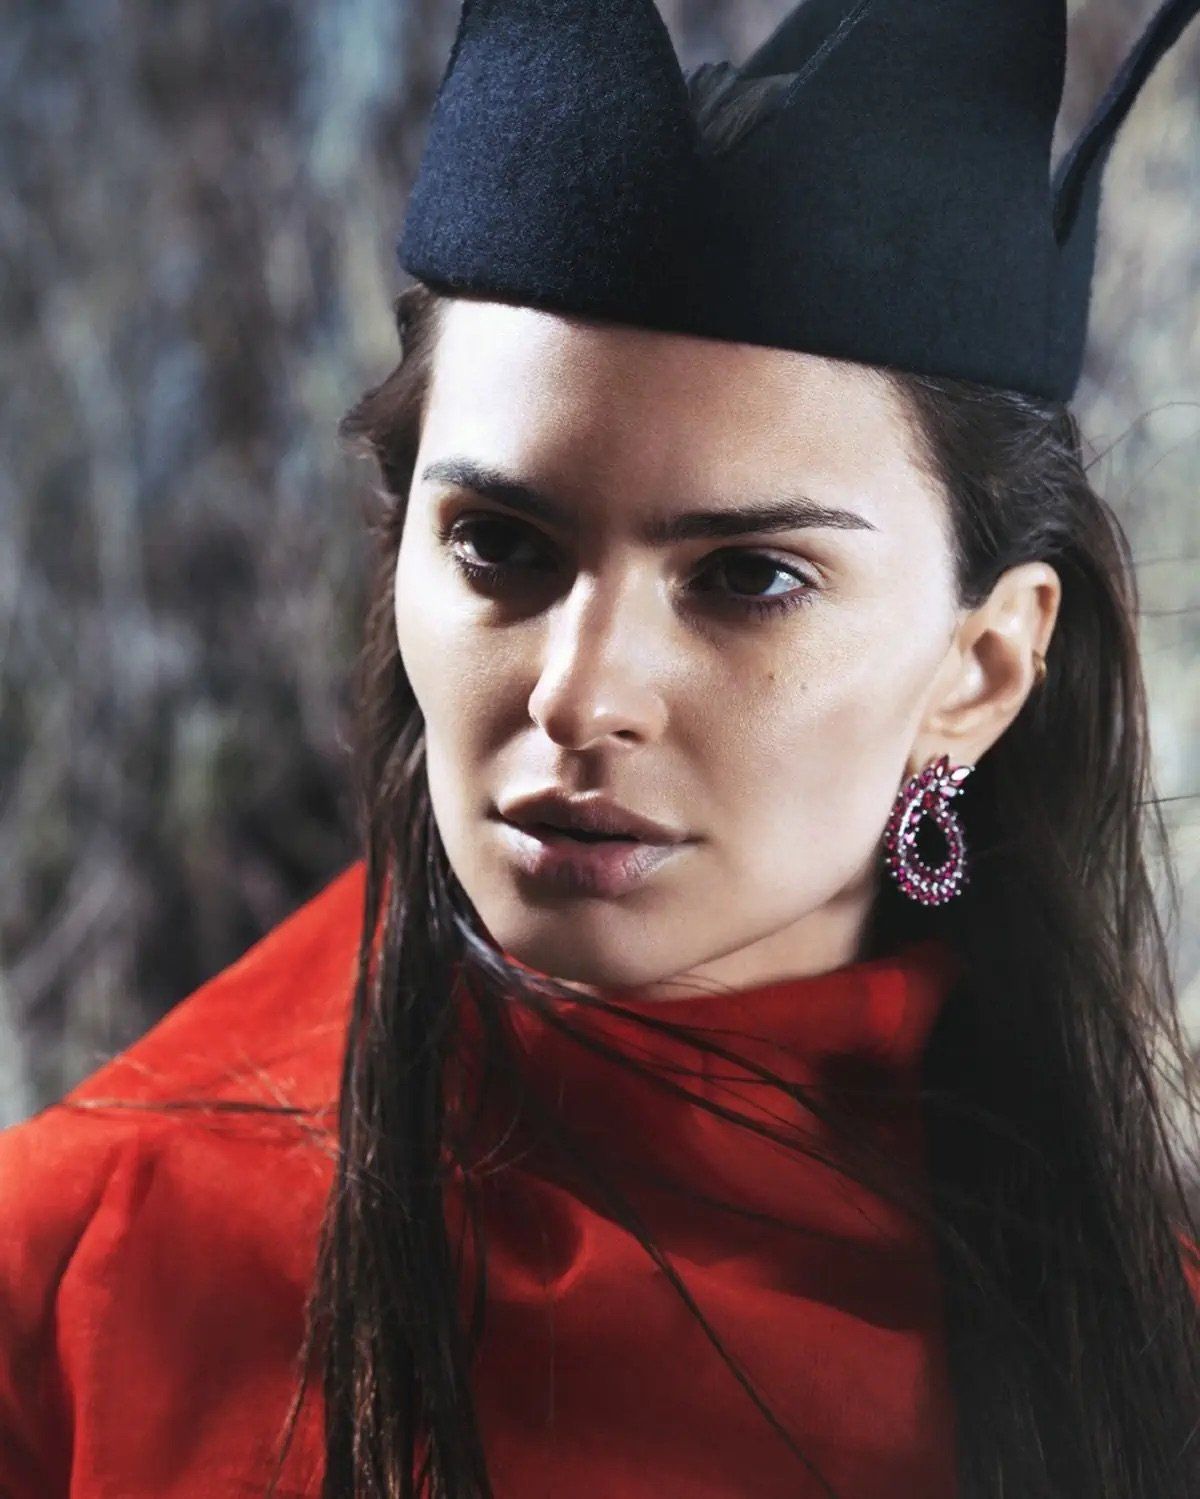 Emily Ratajkowski in Comme des Garcons by Thue Norgaard for D Repubblica Magazine May 2023